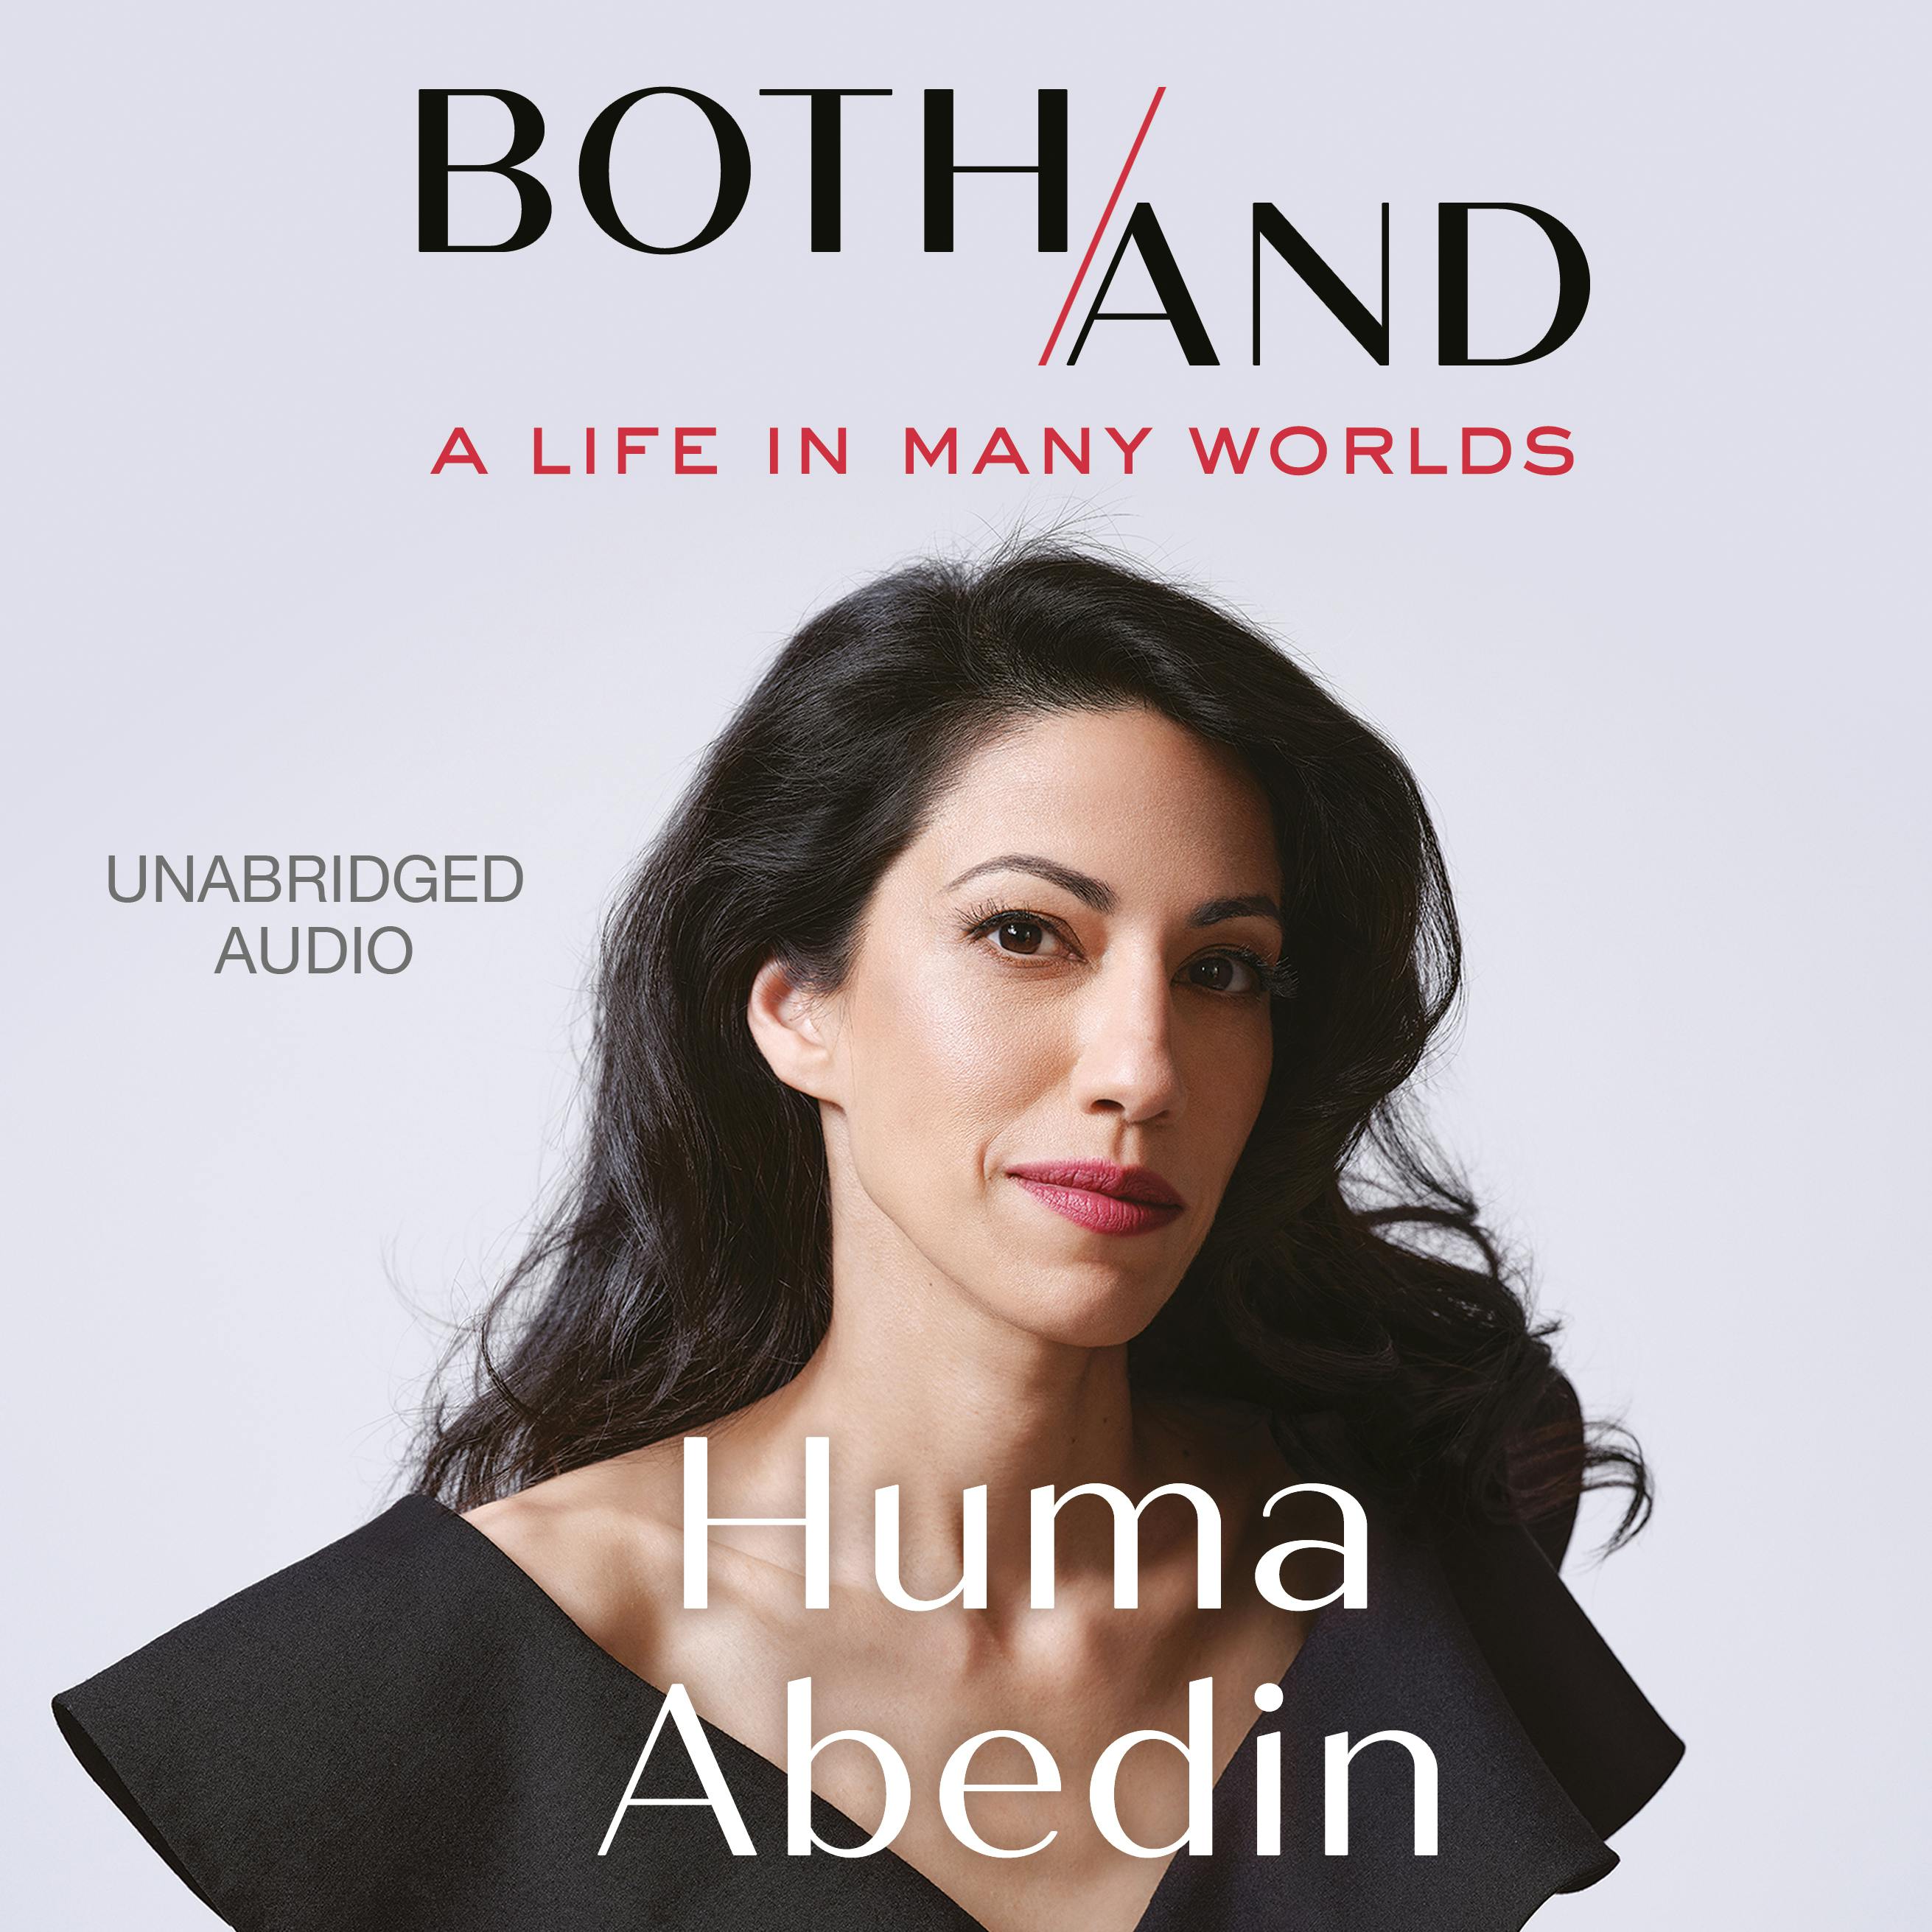 Both/And: A Life in Many Worlds - Huma Abedin